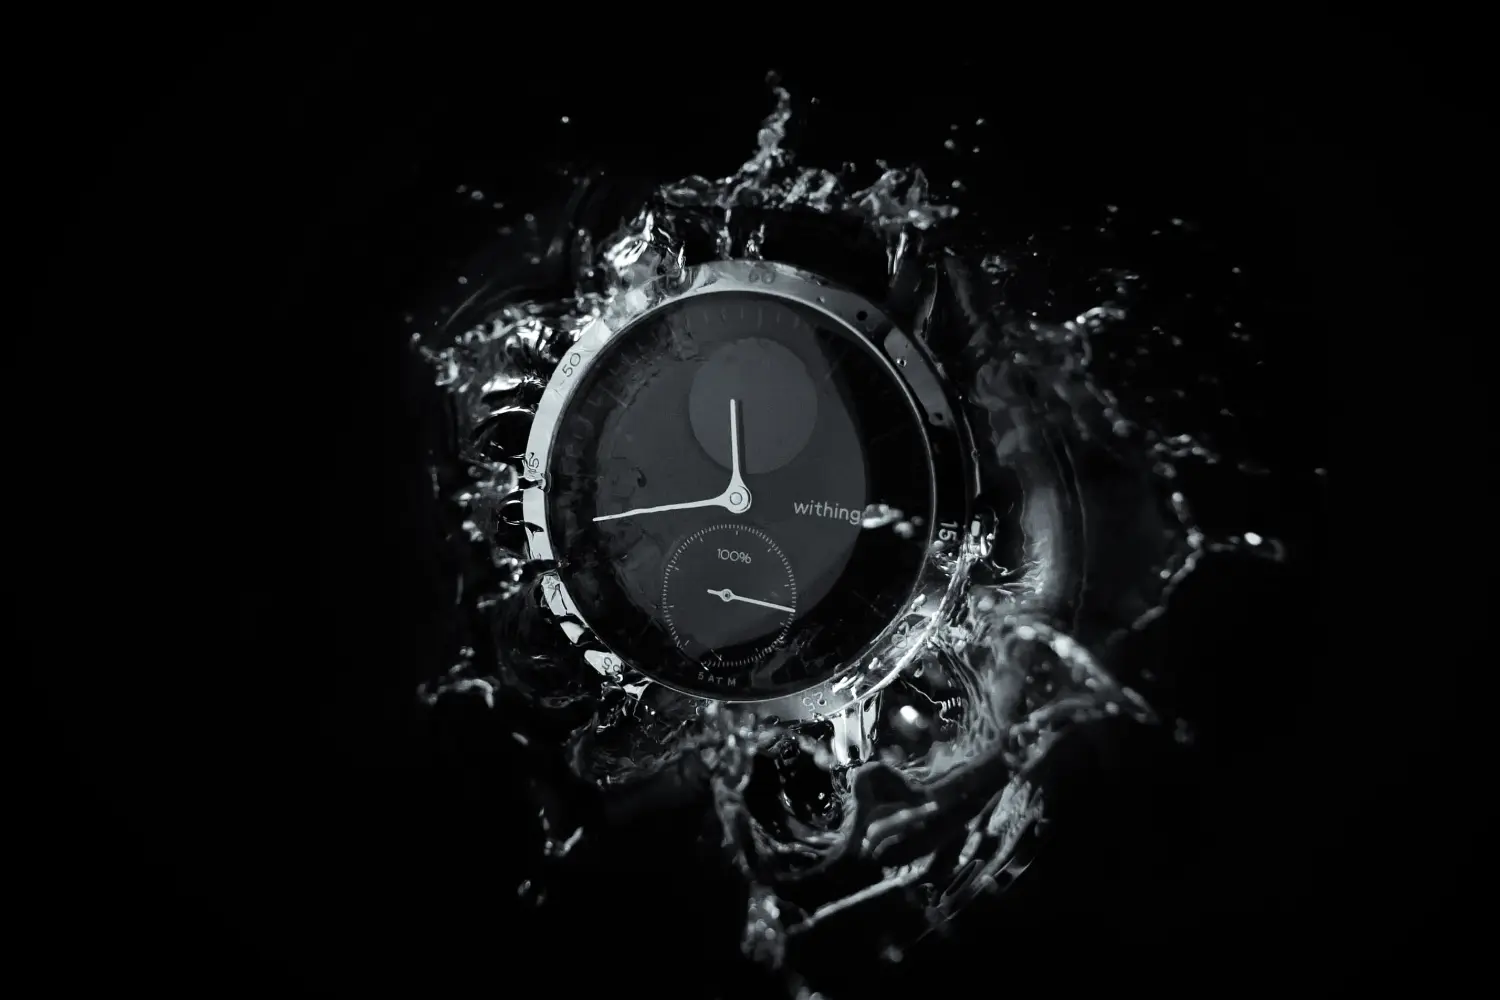 watch with water around it